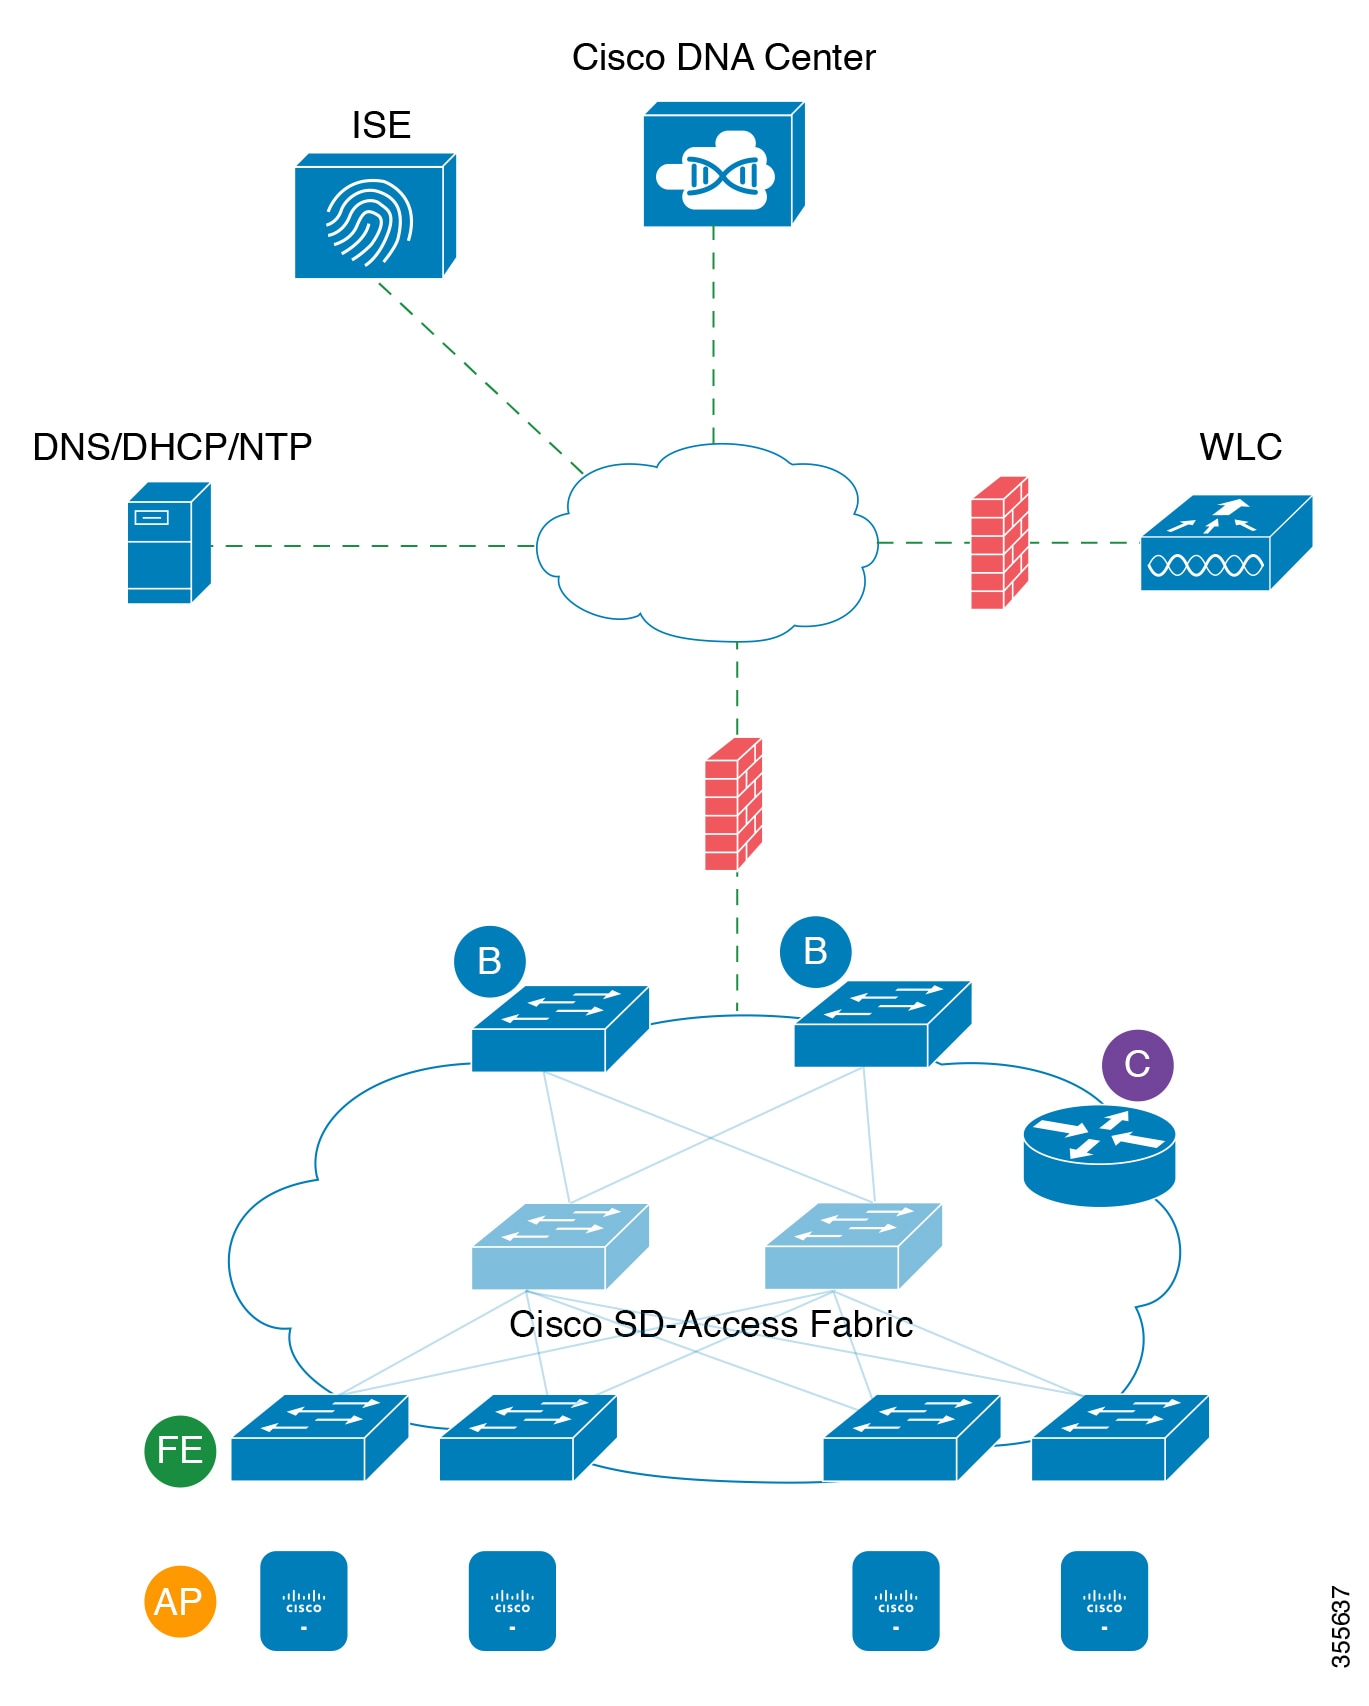 Figure 5: A typical Cisco SD-Access fabric deployment.